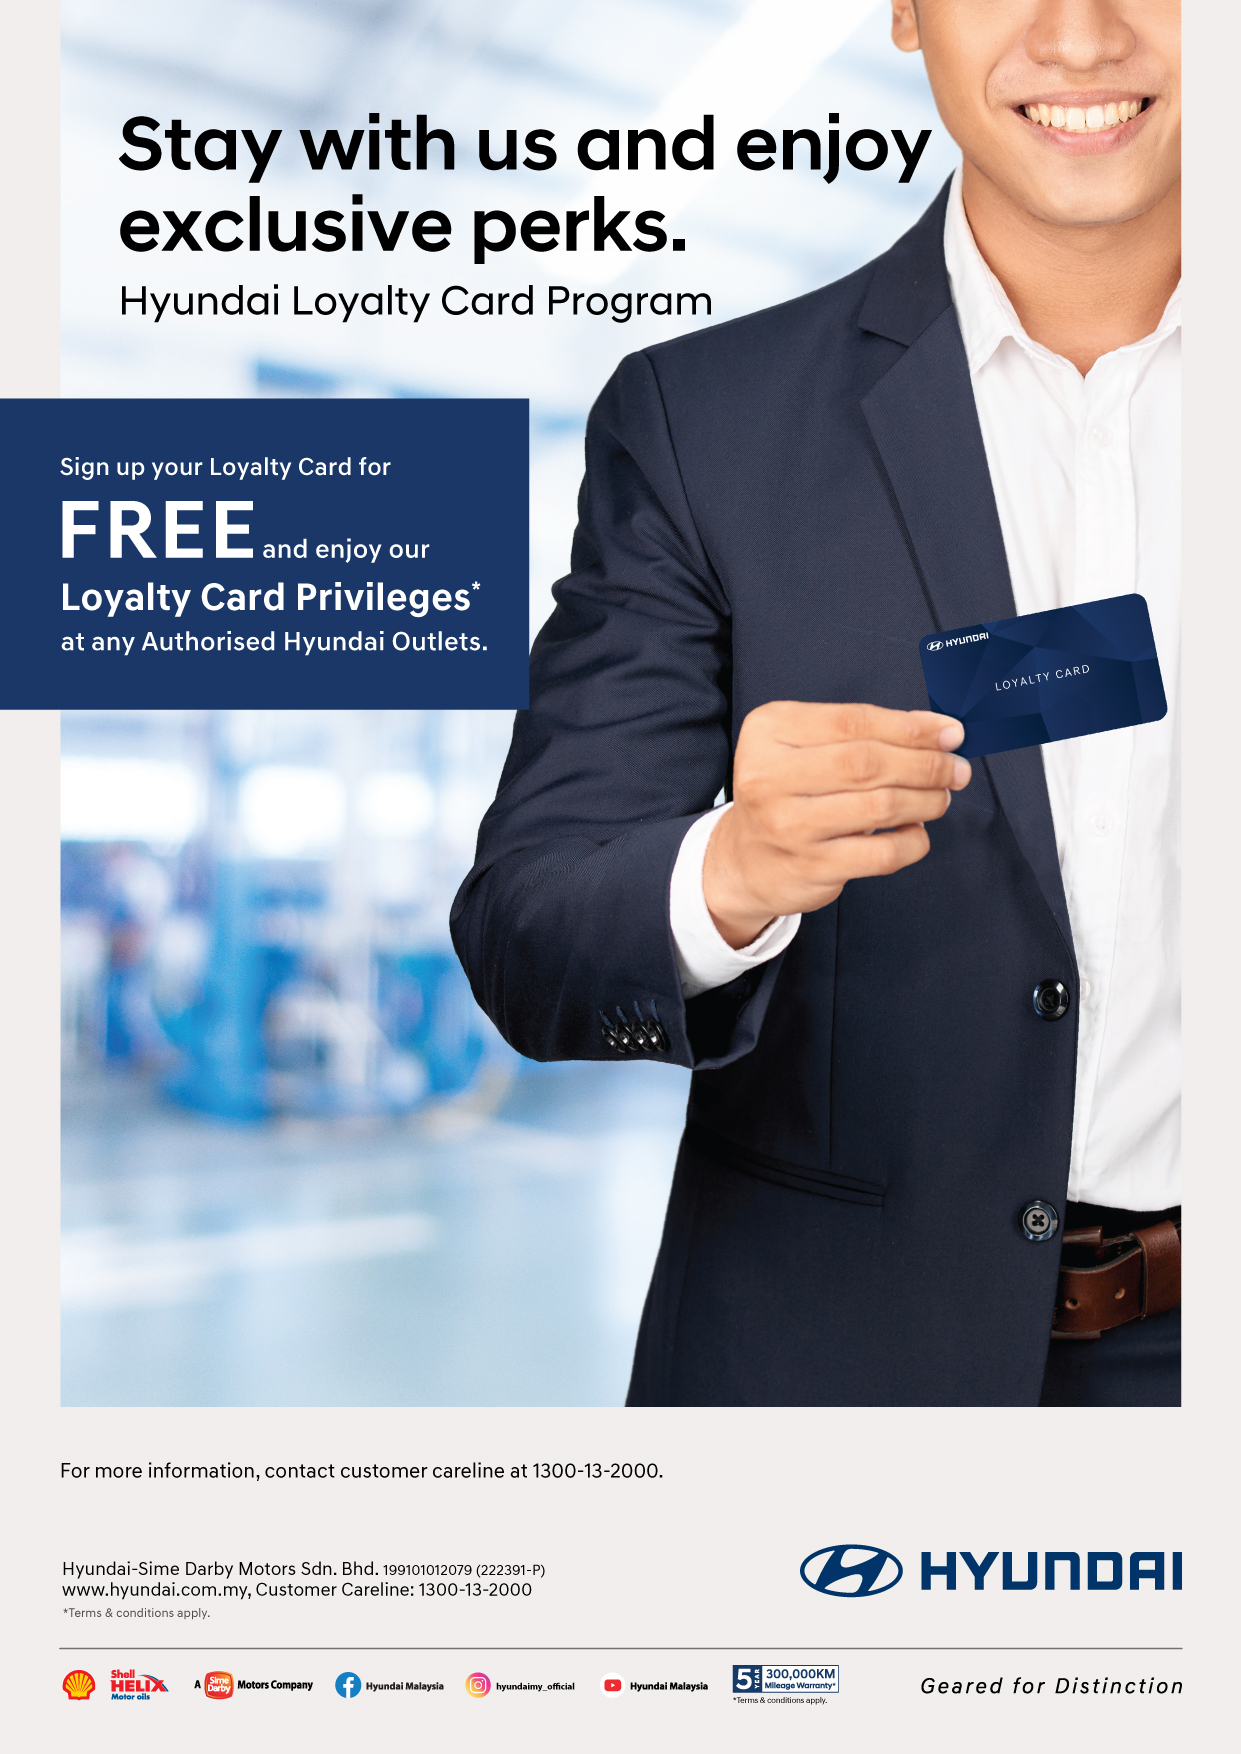 Hyundai Loyalty Card Program  | Stay with us and enjoy exclusive perks. Sign up your Loyalty Card for FREE and enjoy our Loyalty Card Privileges* at any Authorised Hyundai Outlets. Terms & conditions apply.